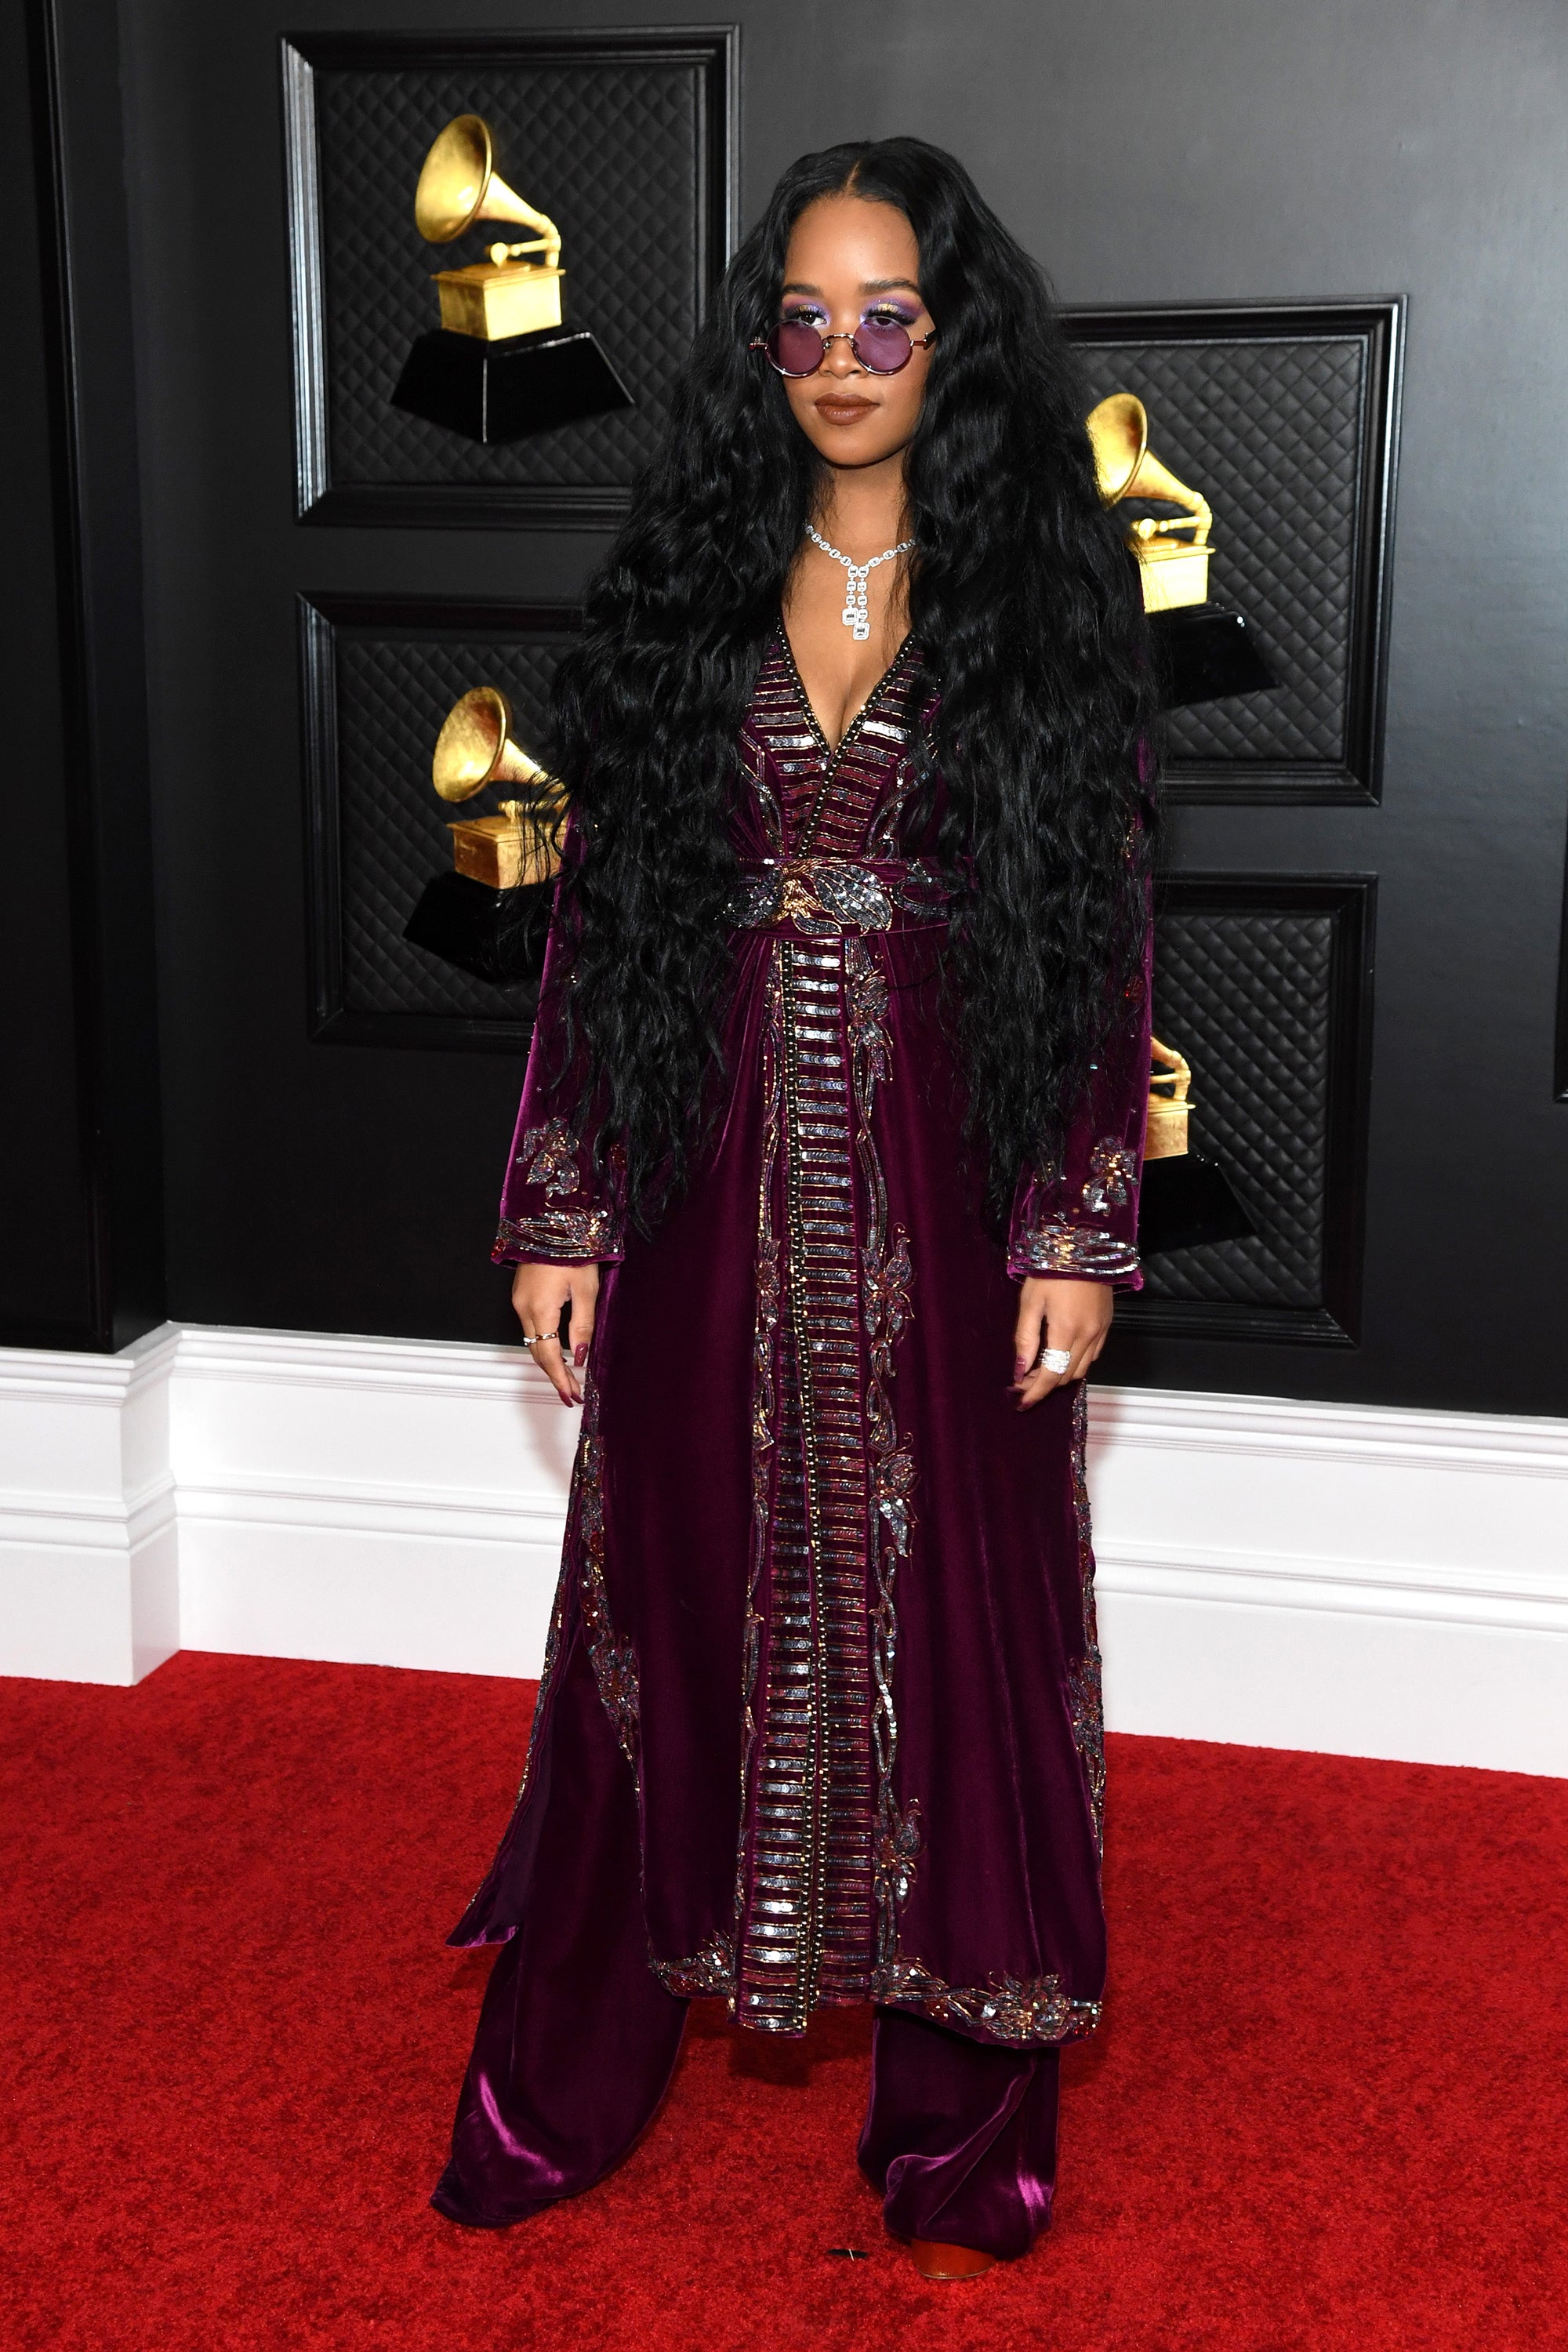 Must-See Style Moments at the 2021 Grammys